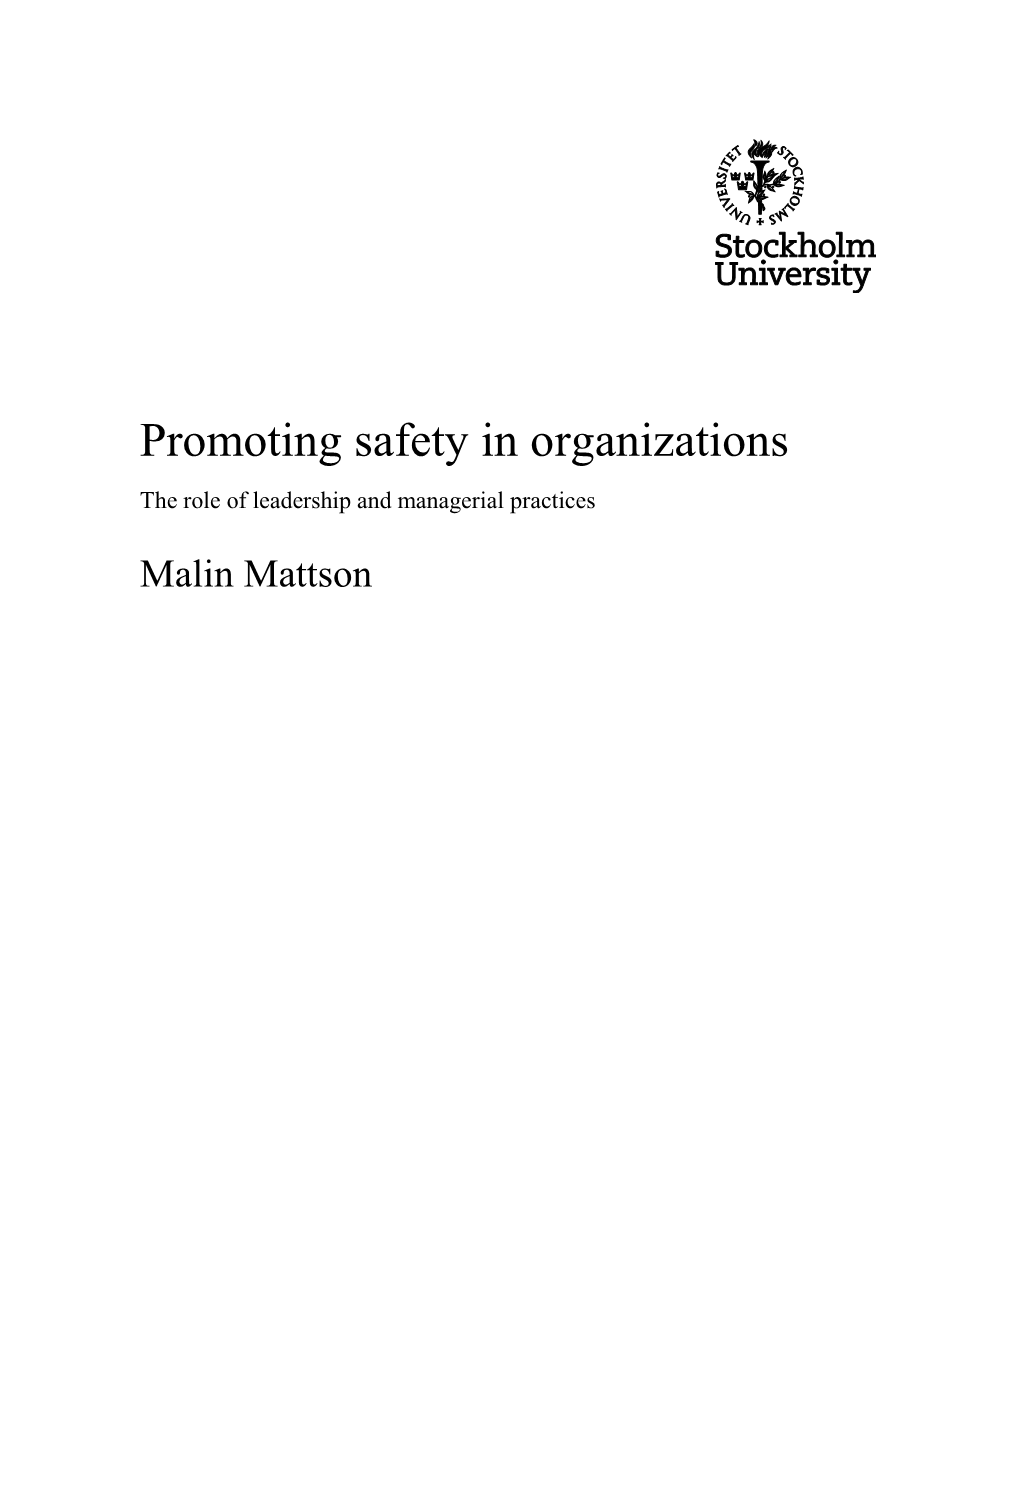 Promoting Safety in Organizations the Role of Leadership and Managerial Practices